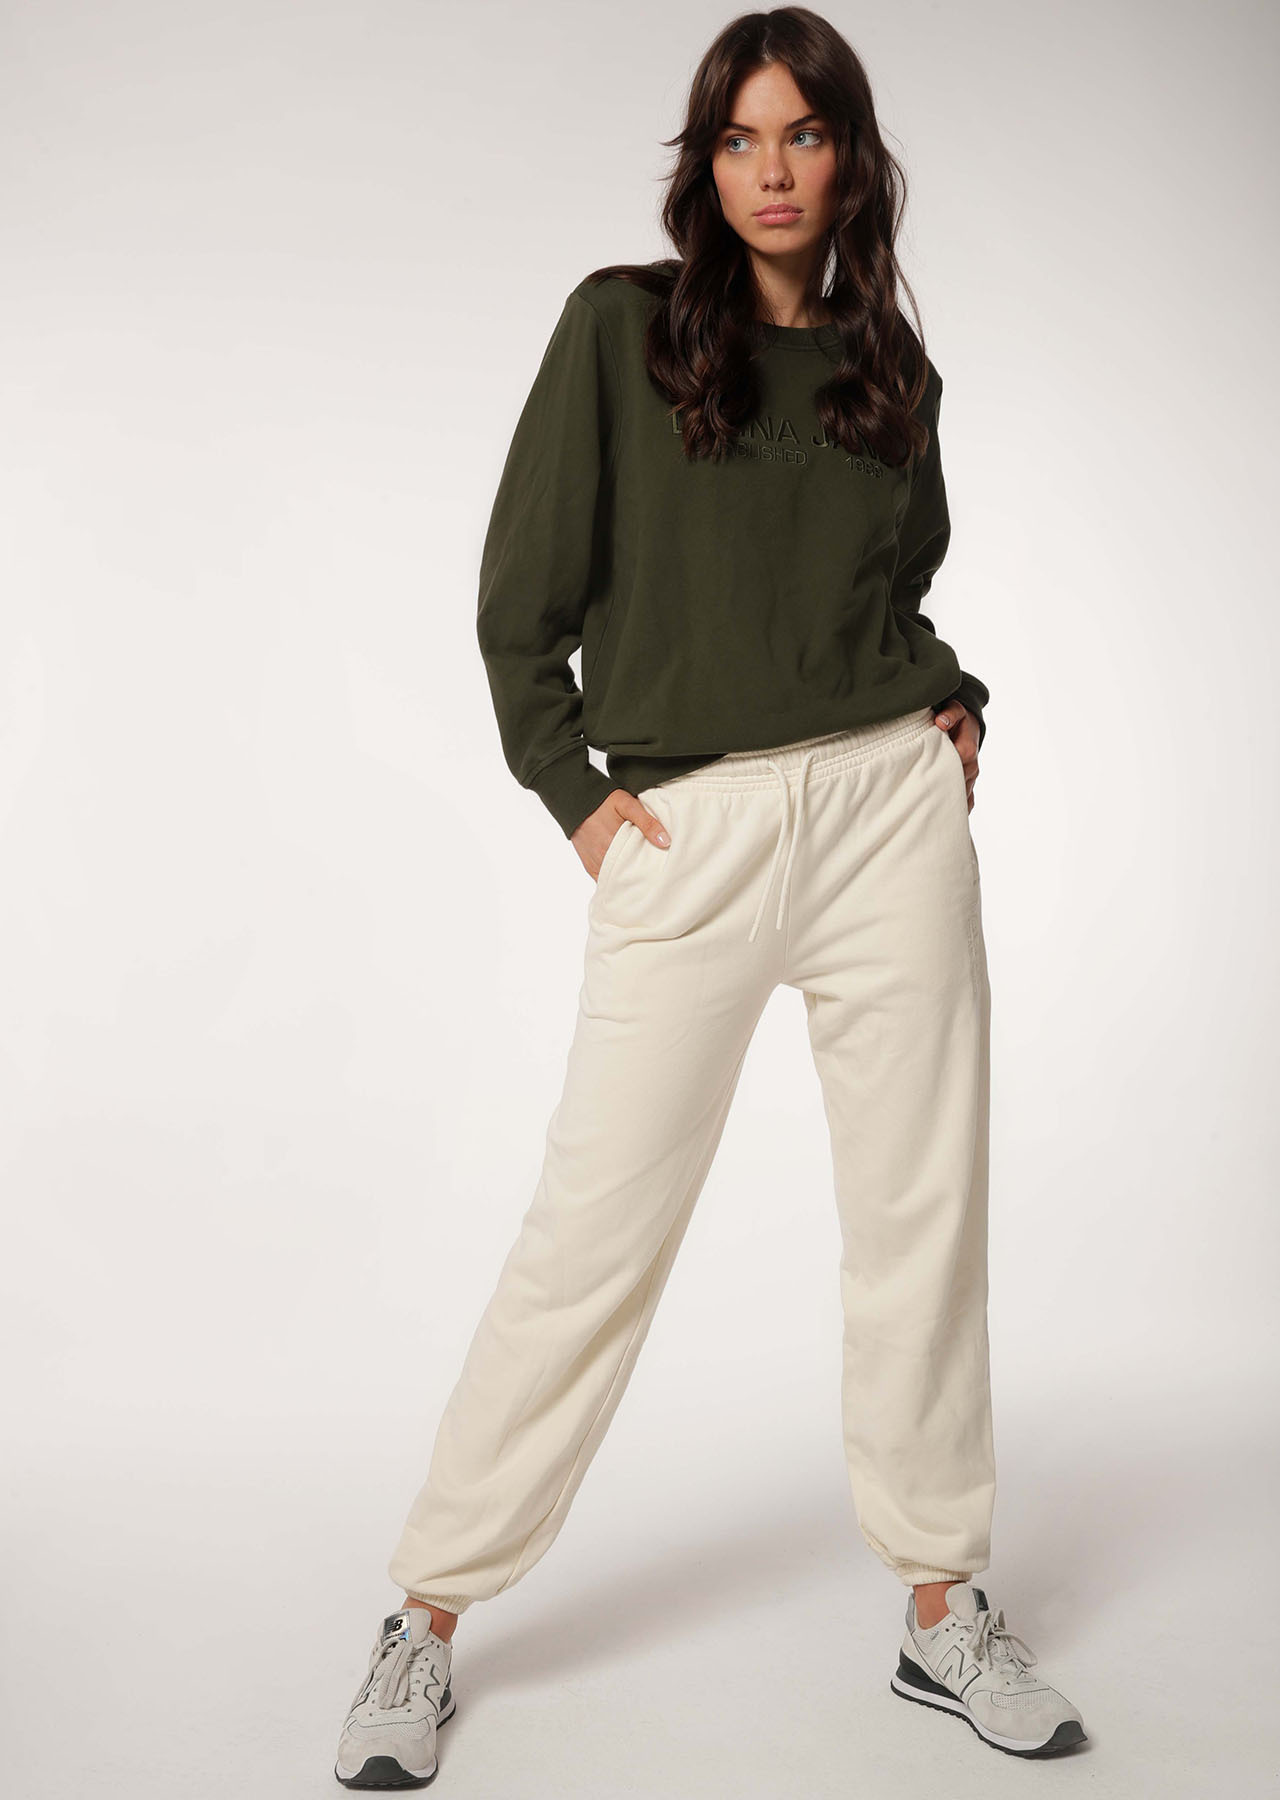 LOGO Layers by Lori Goldstein Petite Knit Pull-On Ankle Leggings